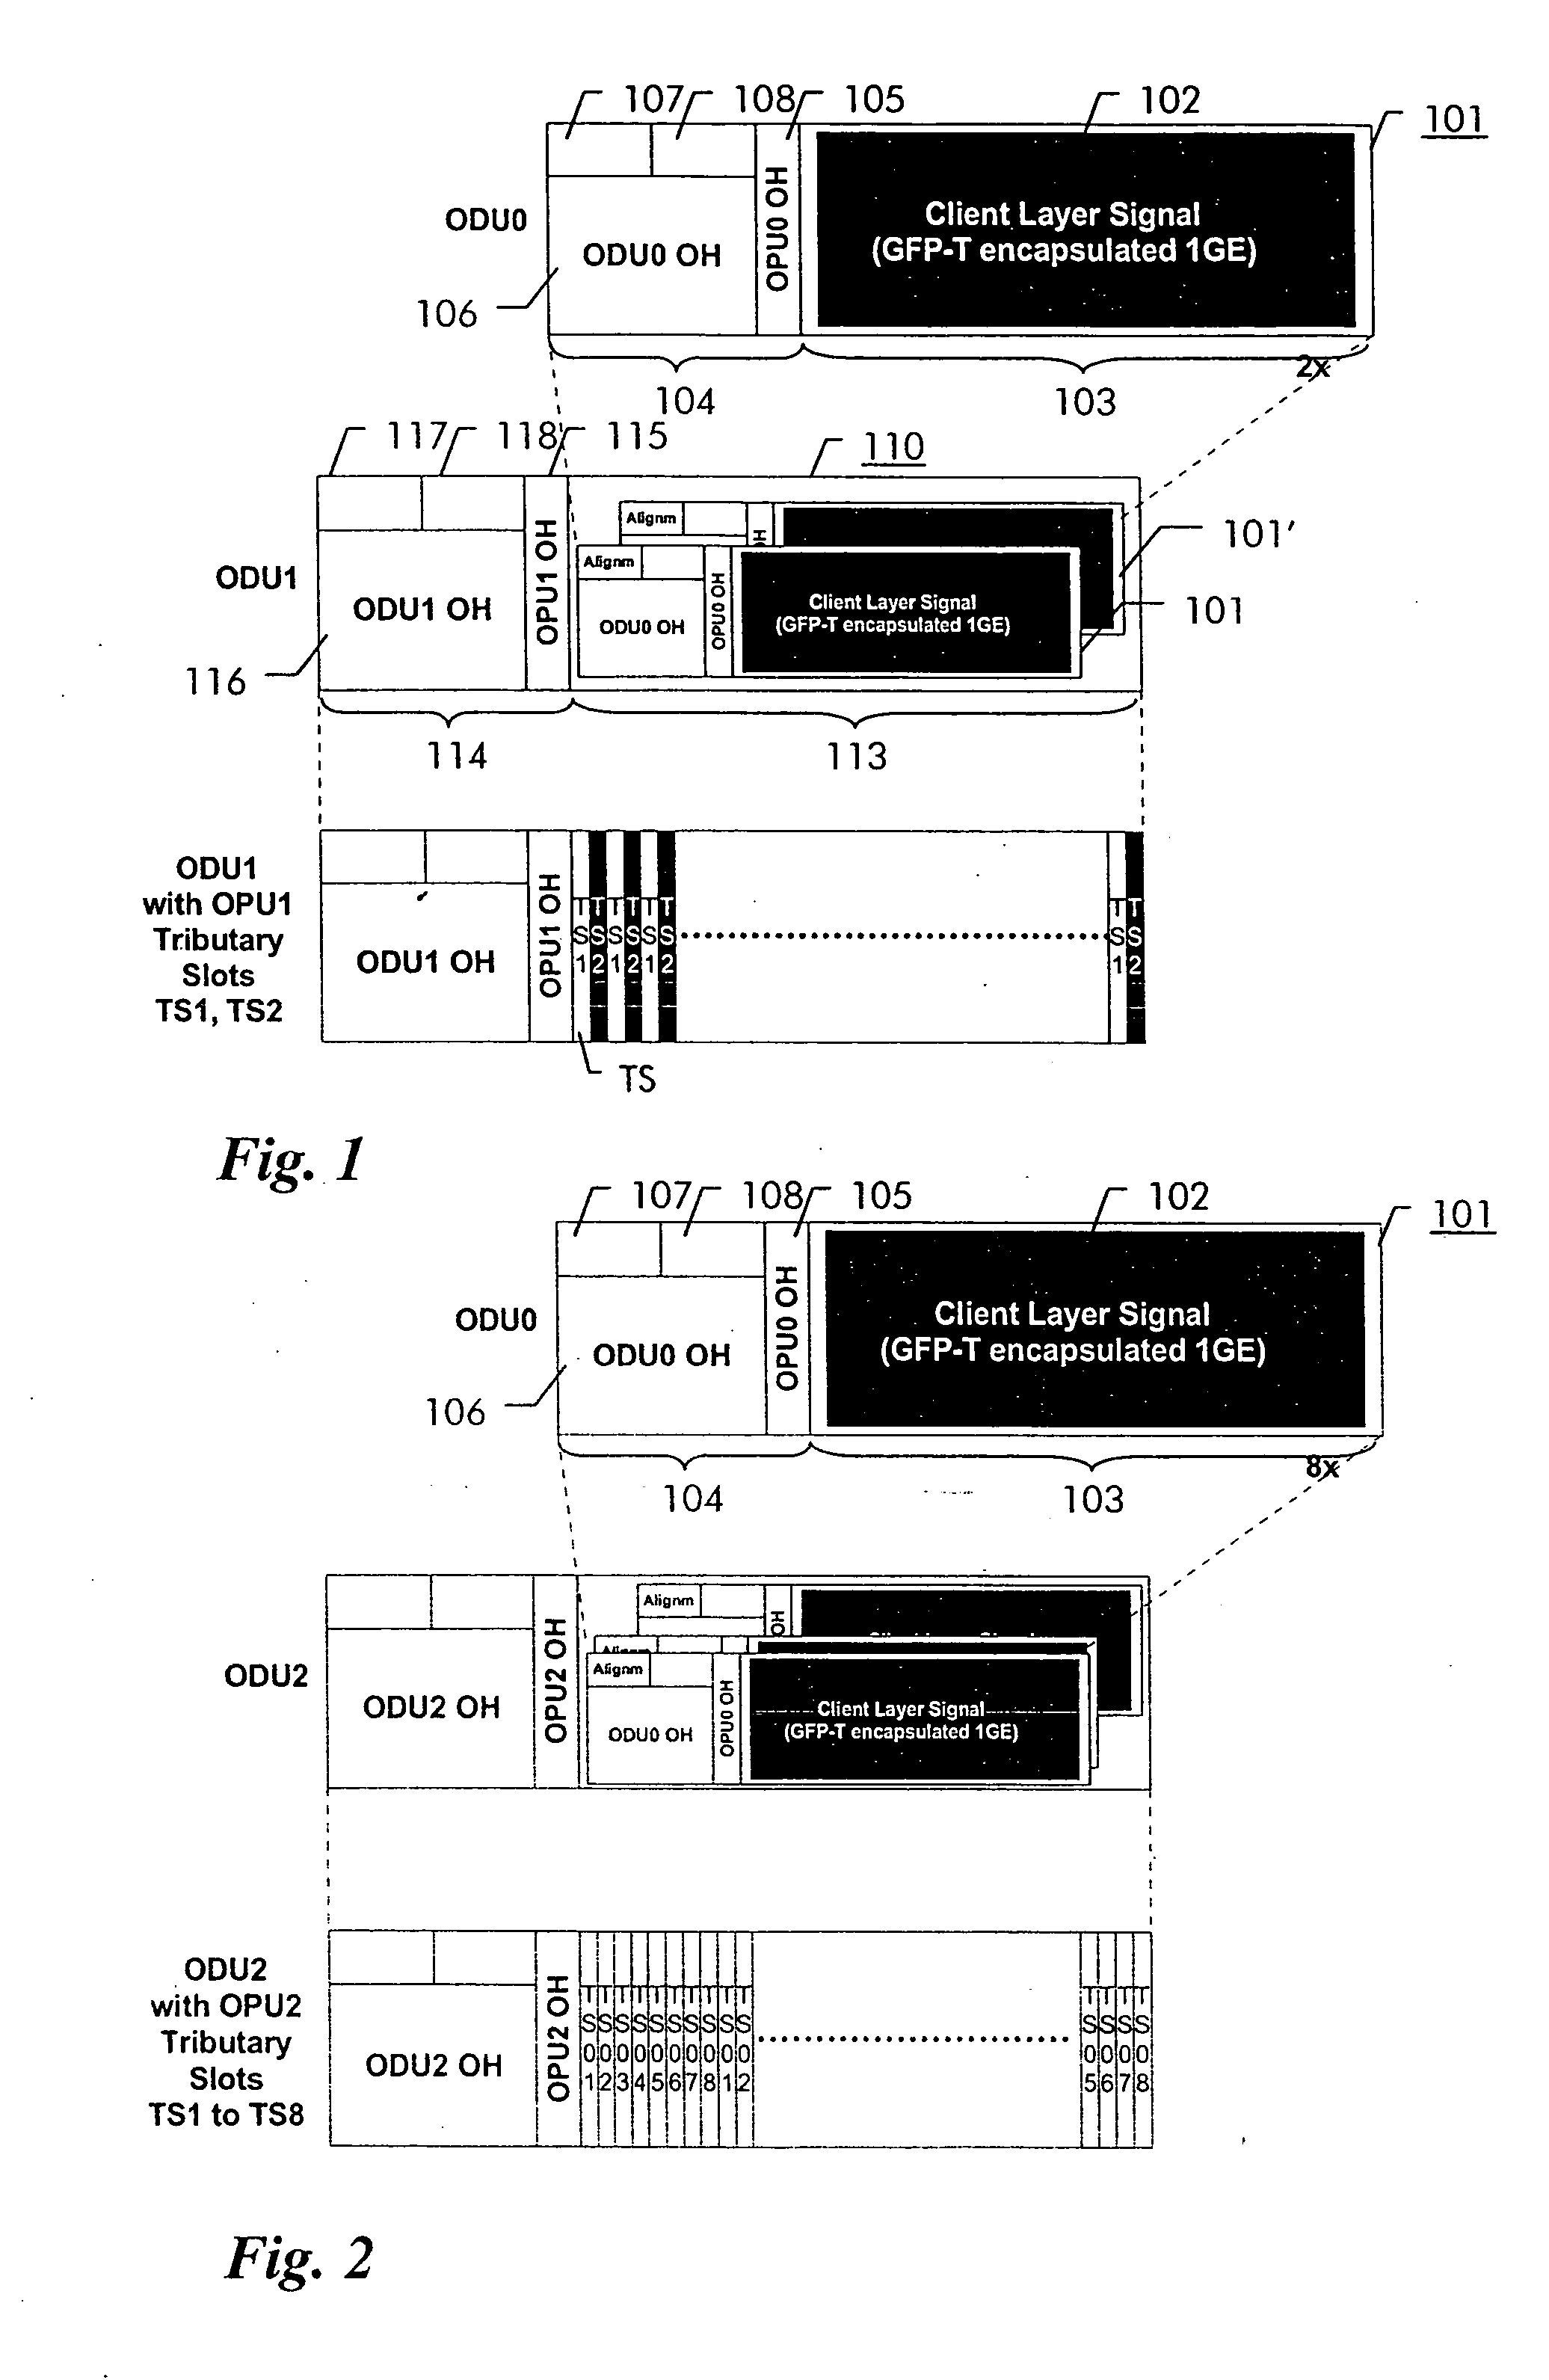 Method and apparatus for transporting a client layer signal over an optical transport network (OTN)